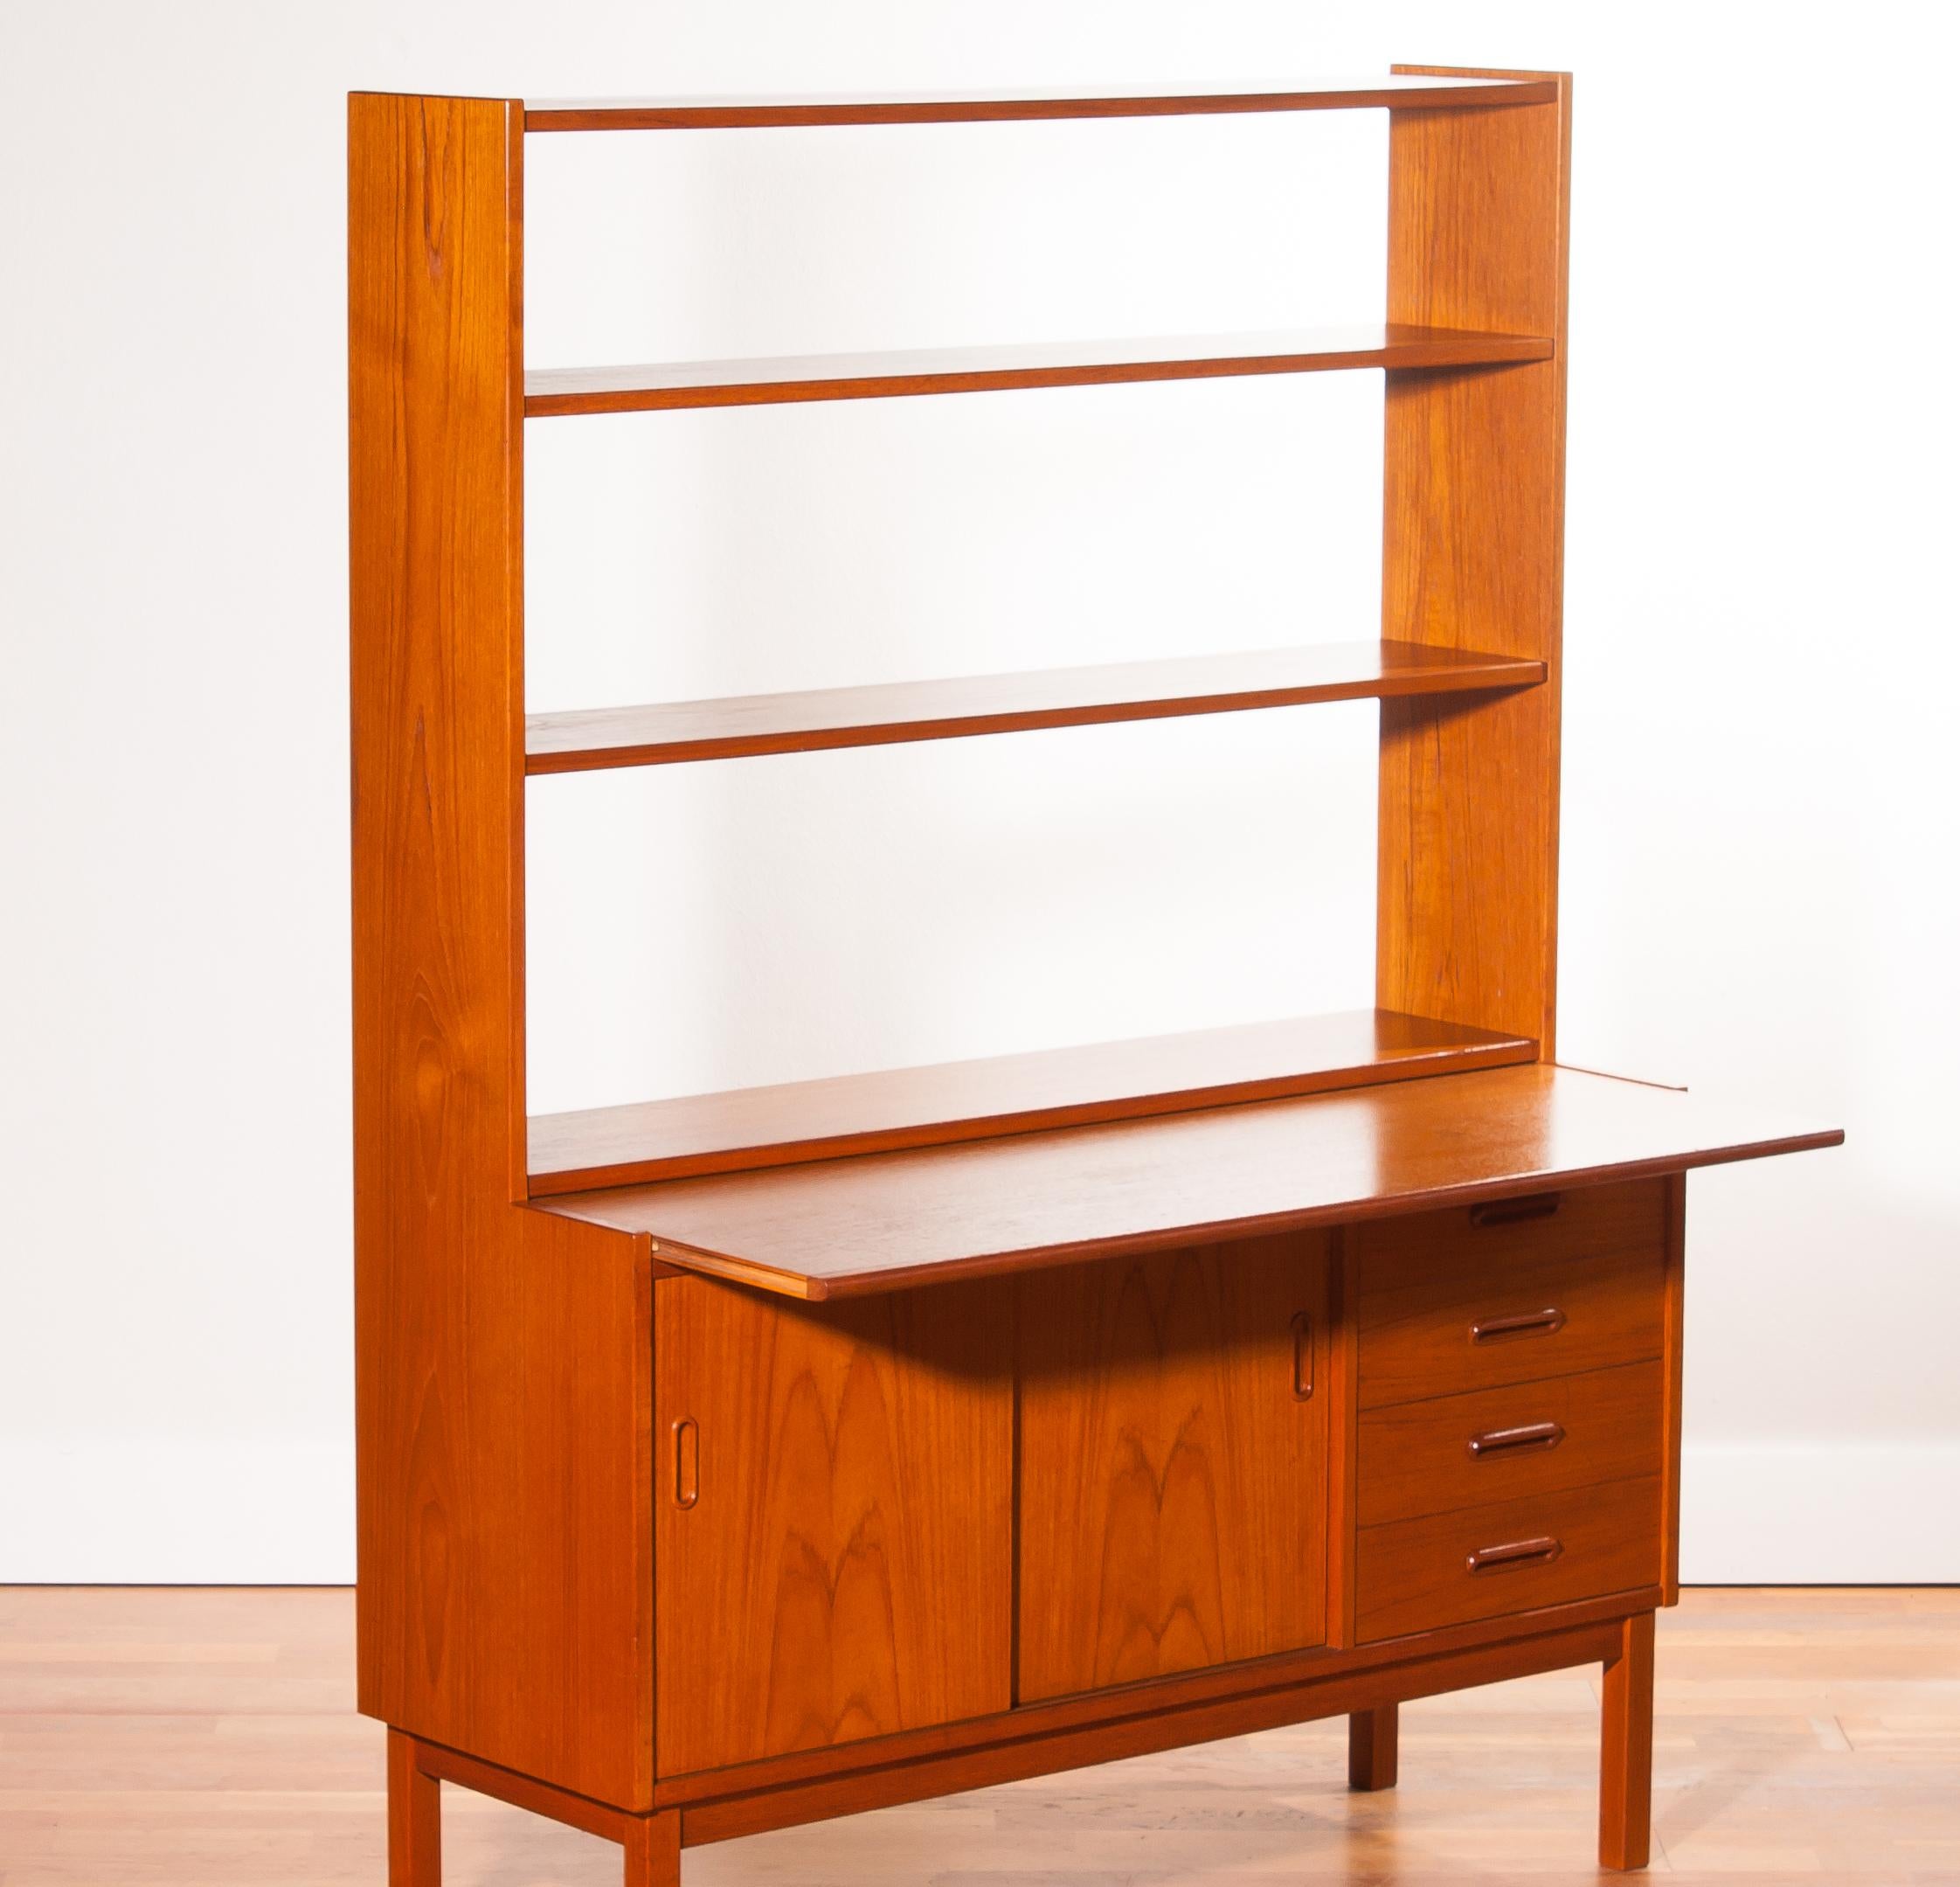 1960s, Teak Bookcase with Slid Able Writing or Working Space from Sweden 5